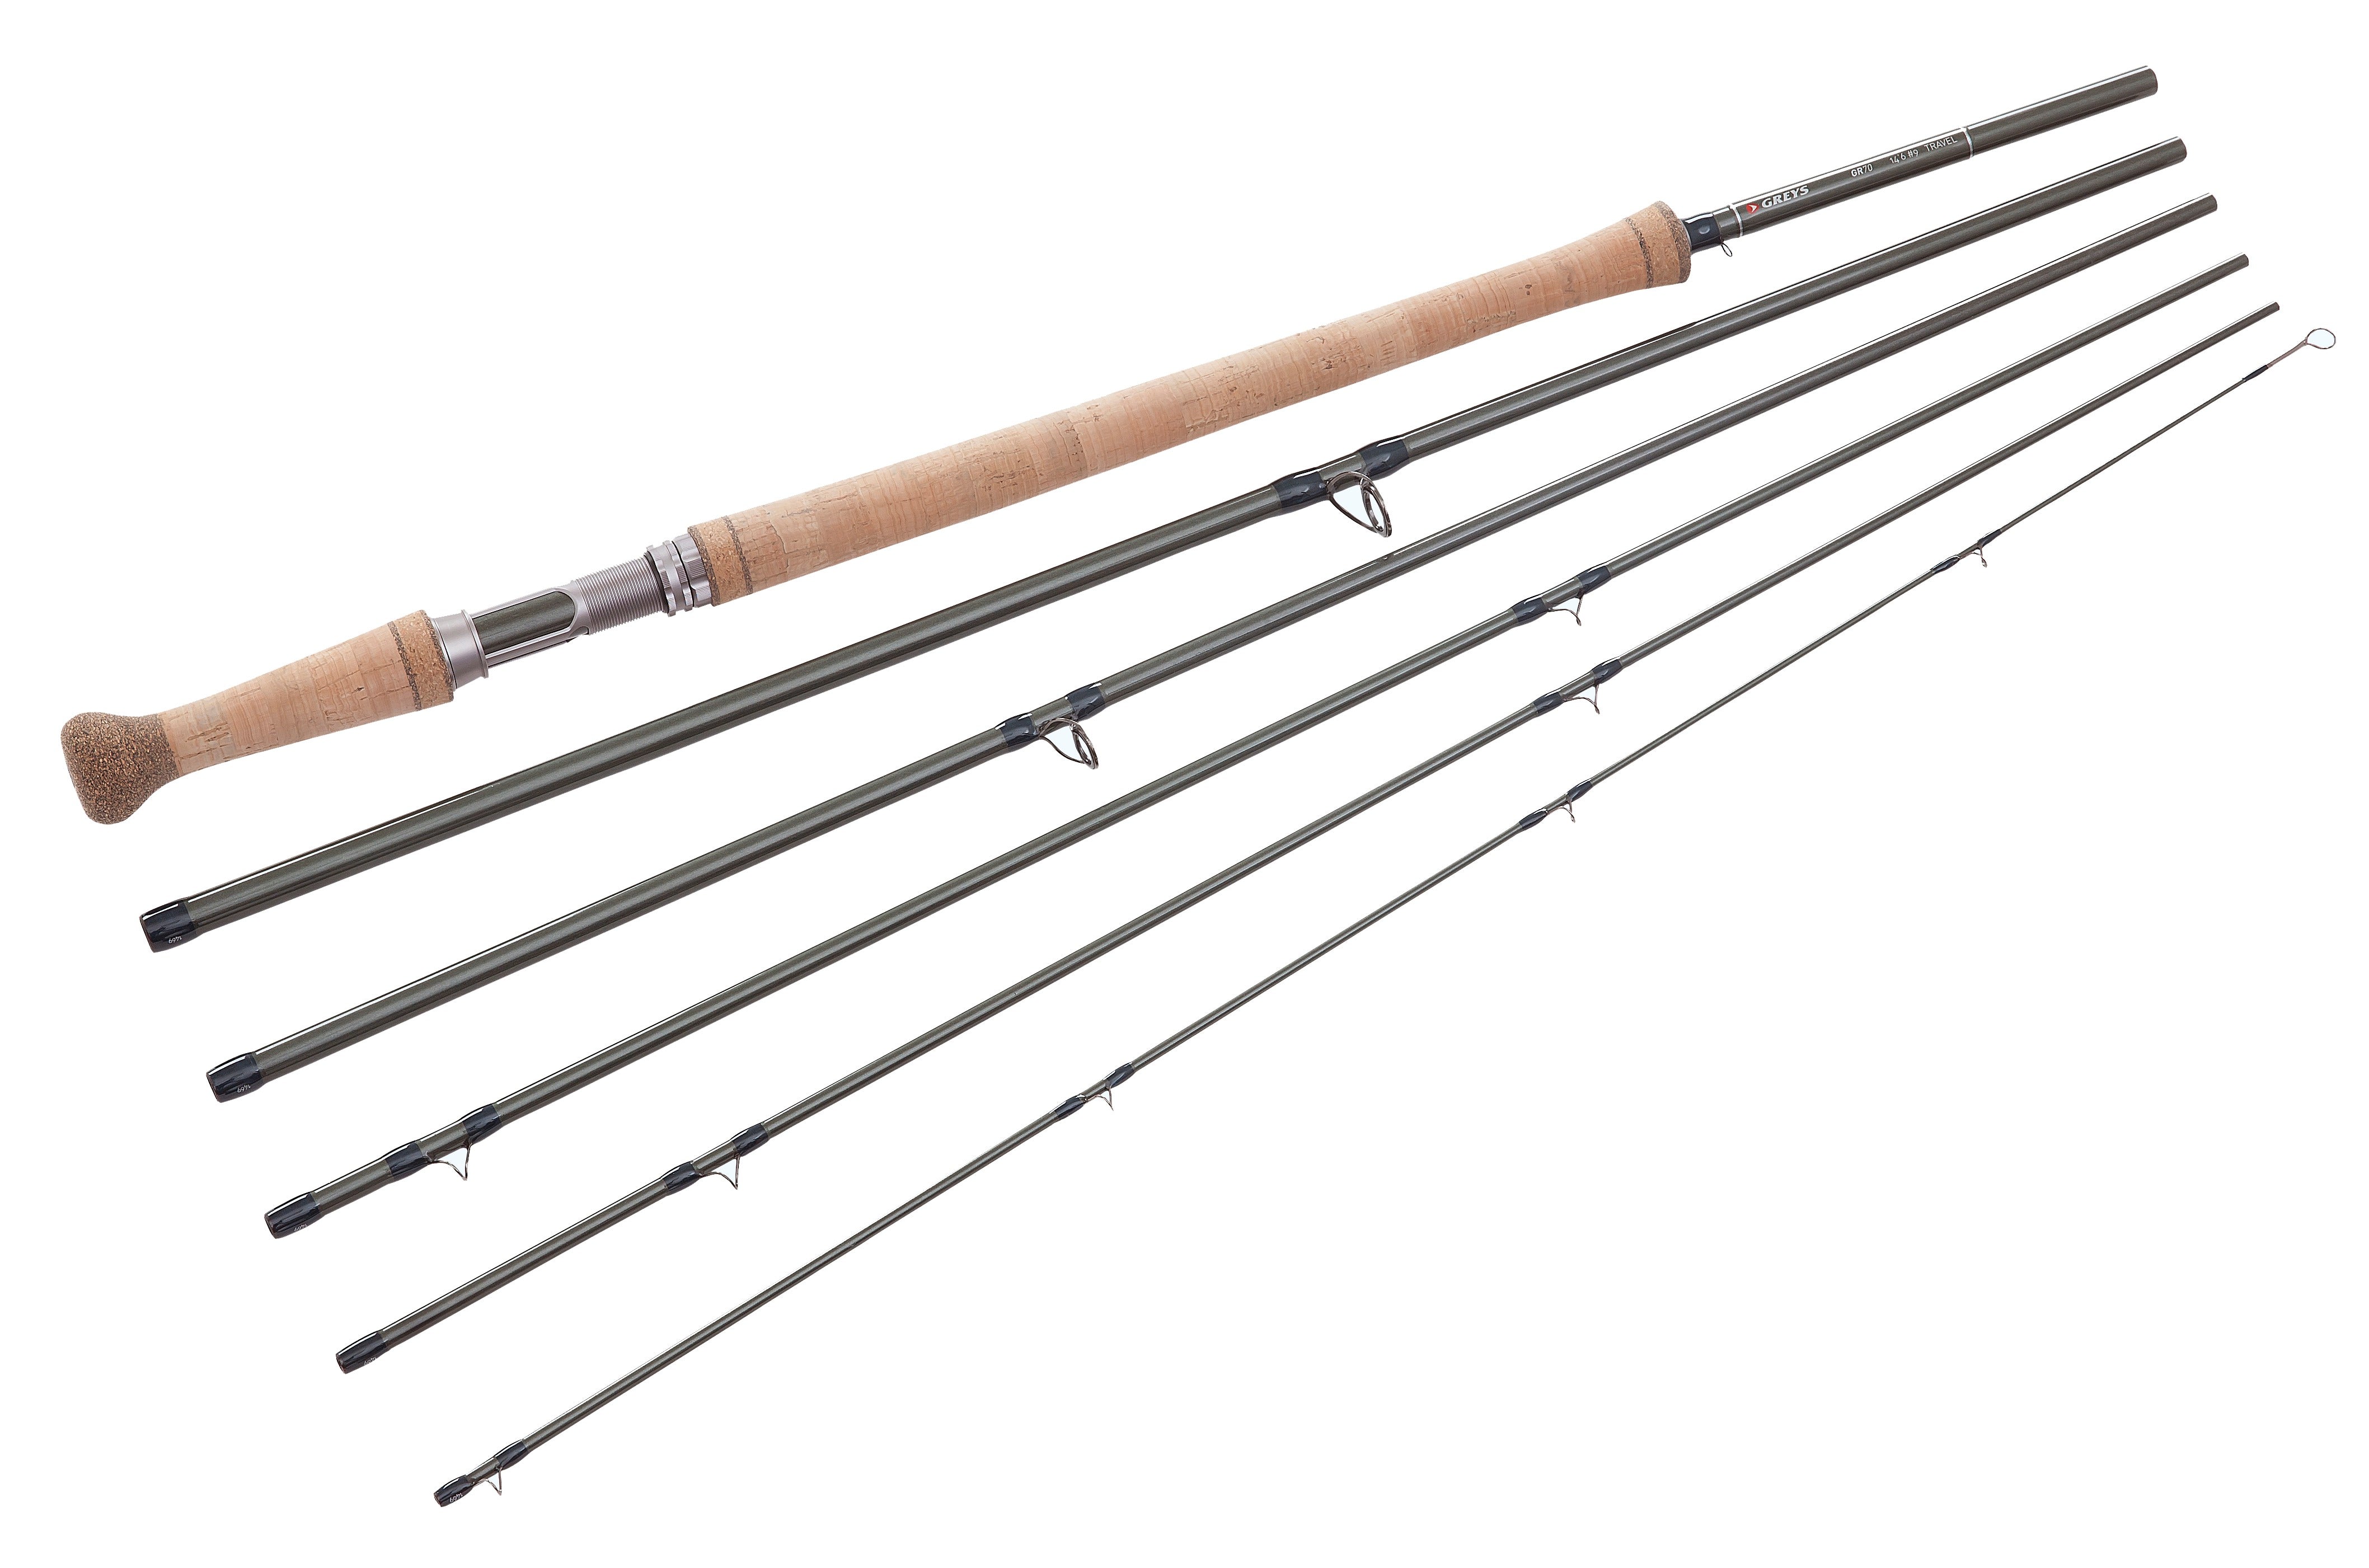 Greys GR70 Travel Double Handed 14'6 Fly Rod – Anglers World